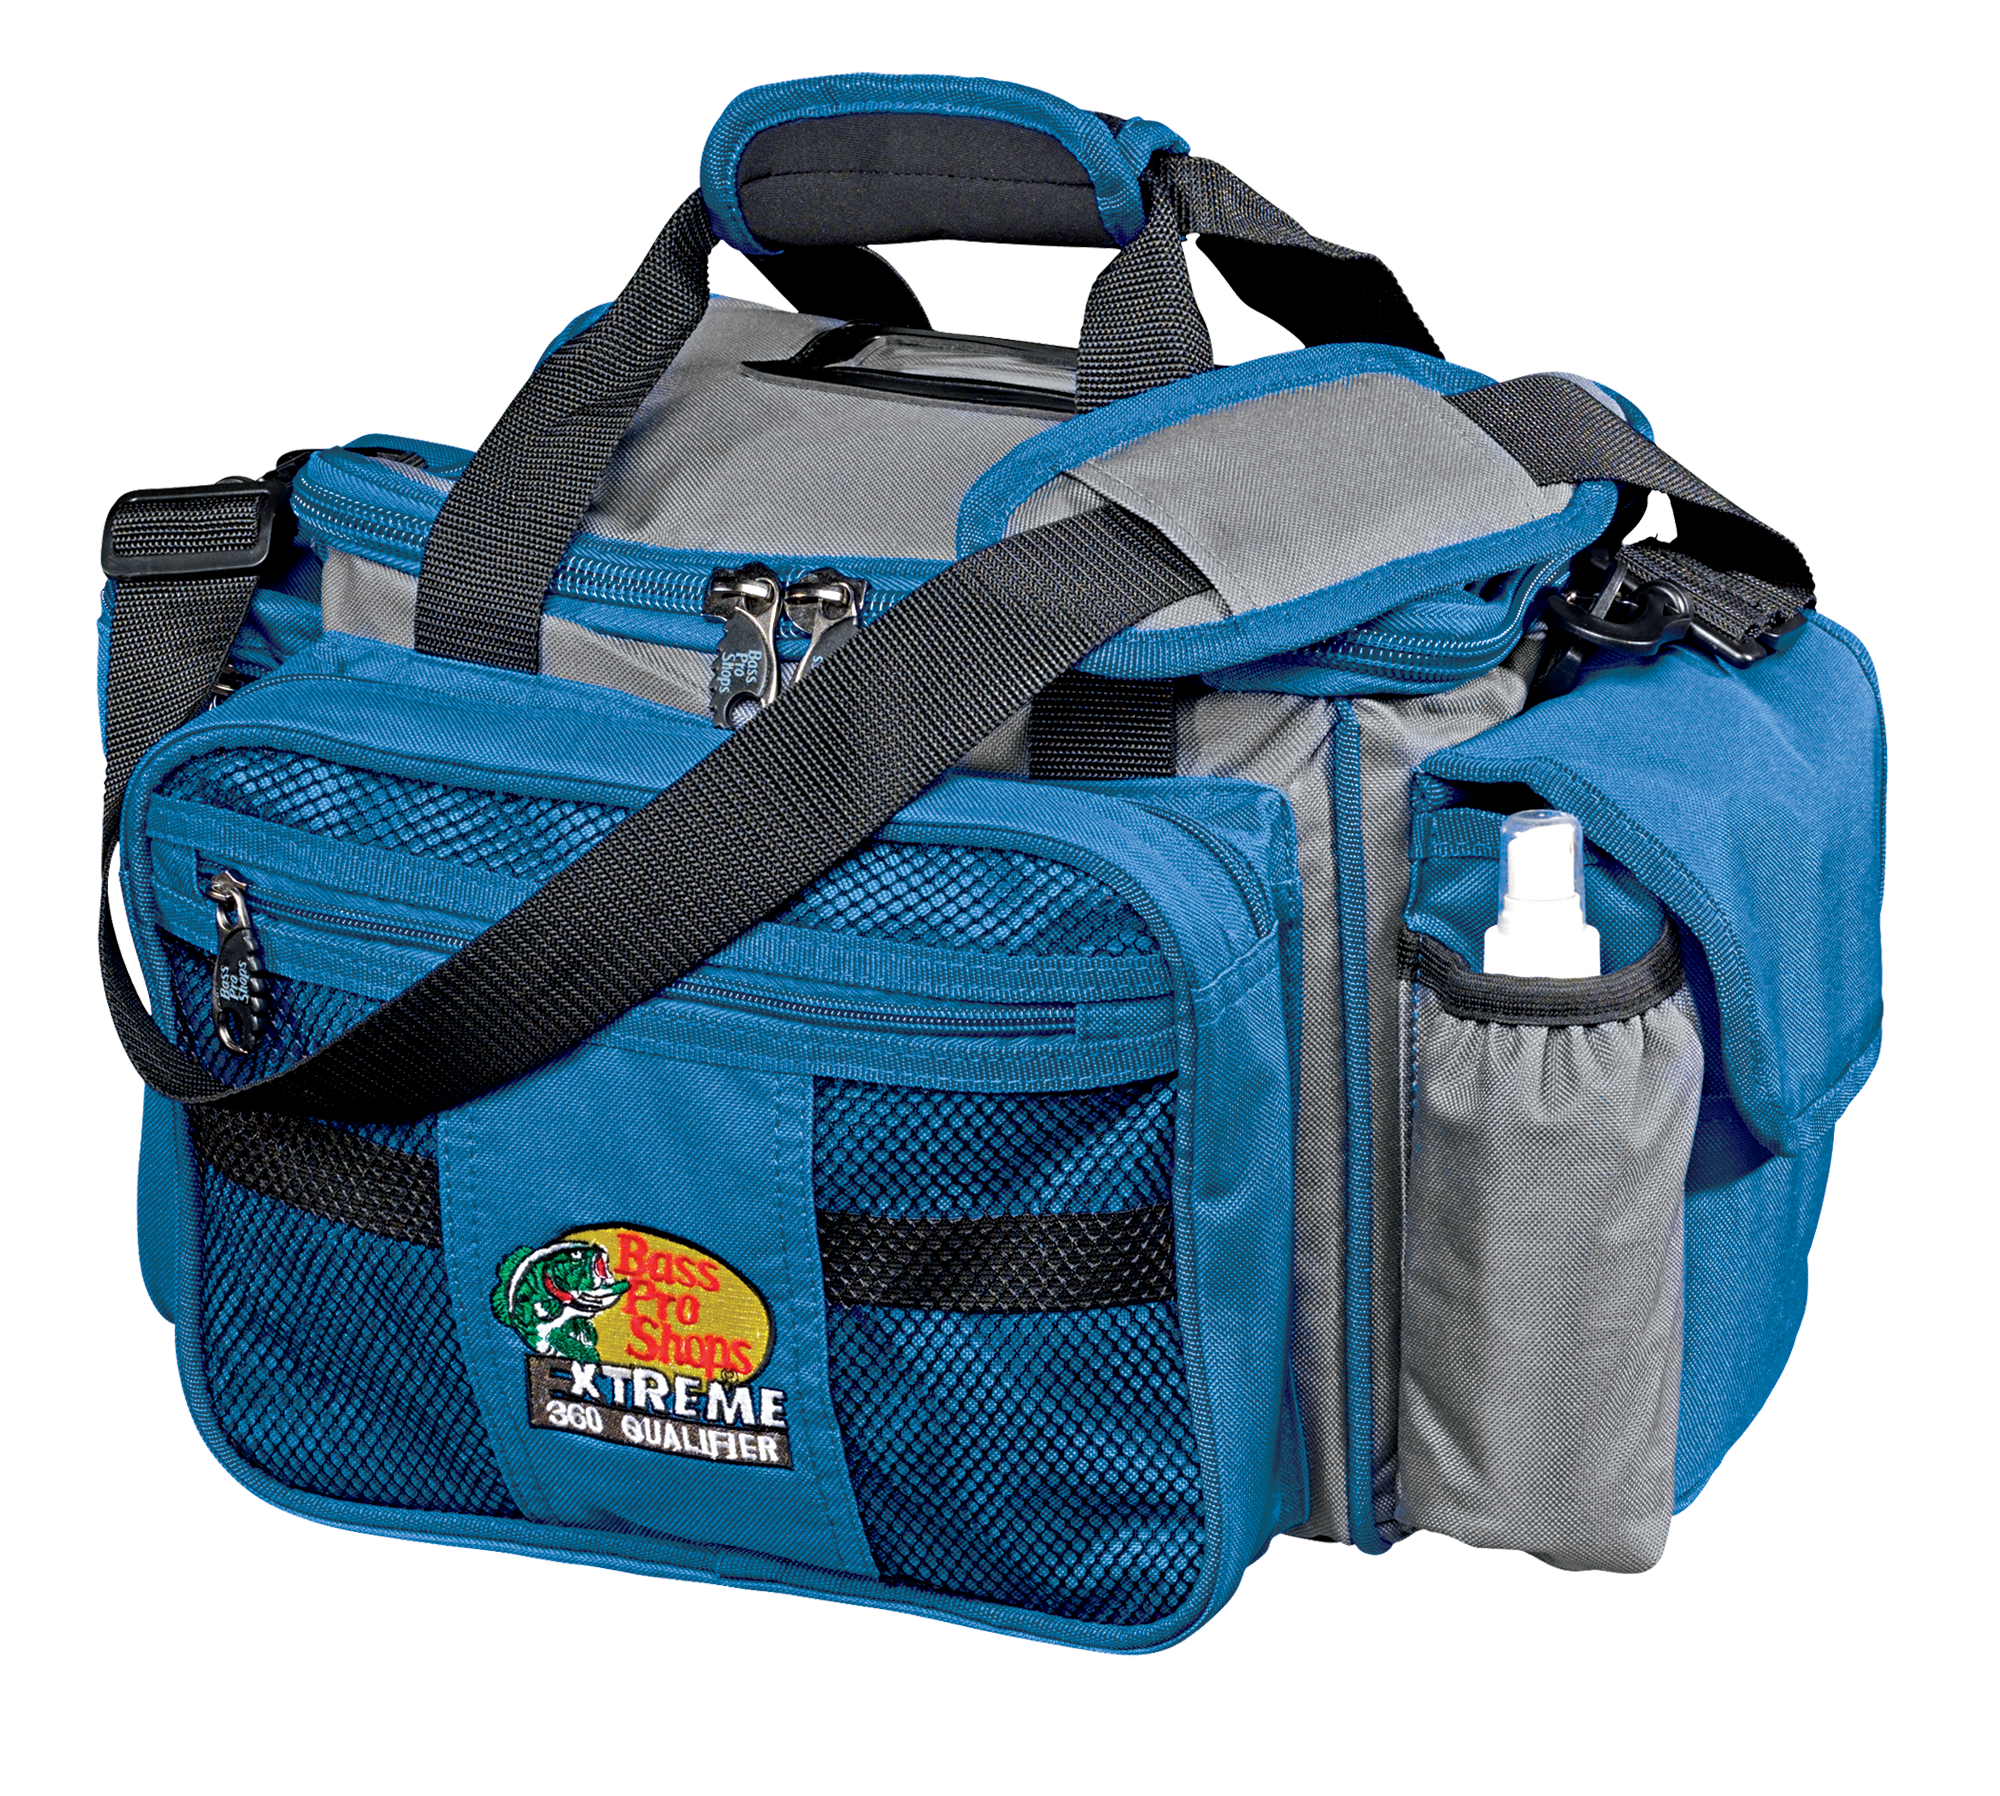 Bass Pro Shops Extreme Qualifier 360 Tackle Bag - Blue/Gray